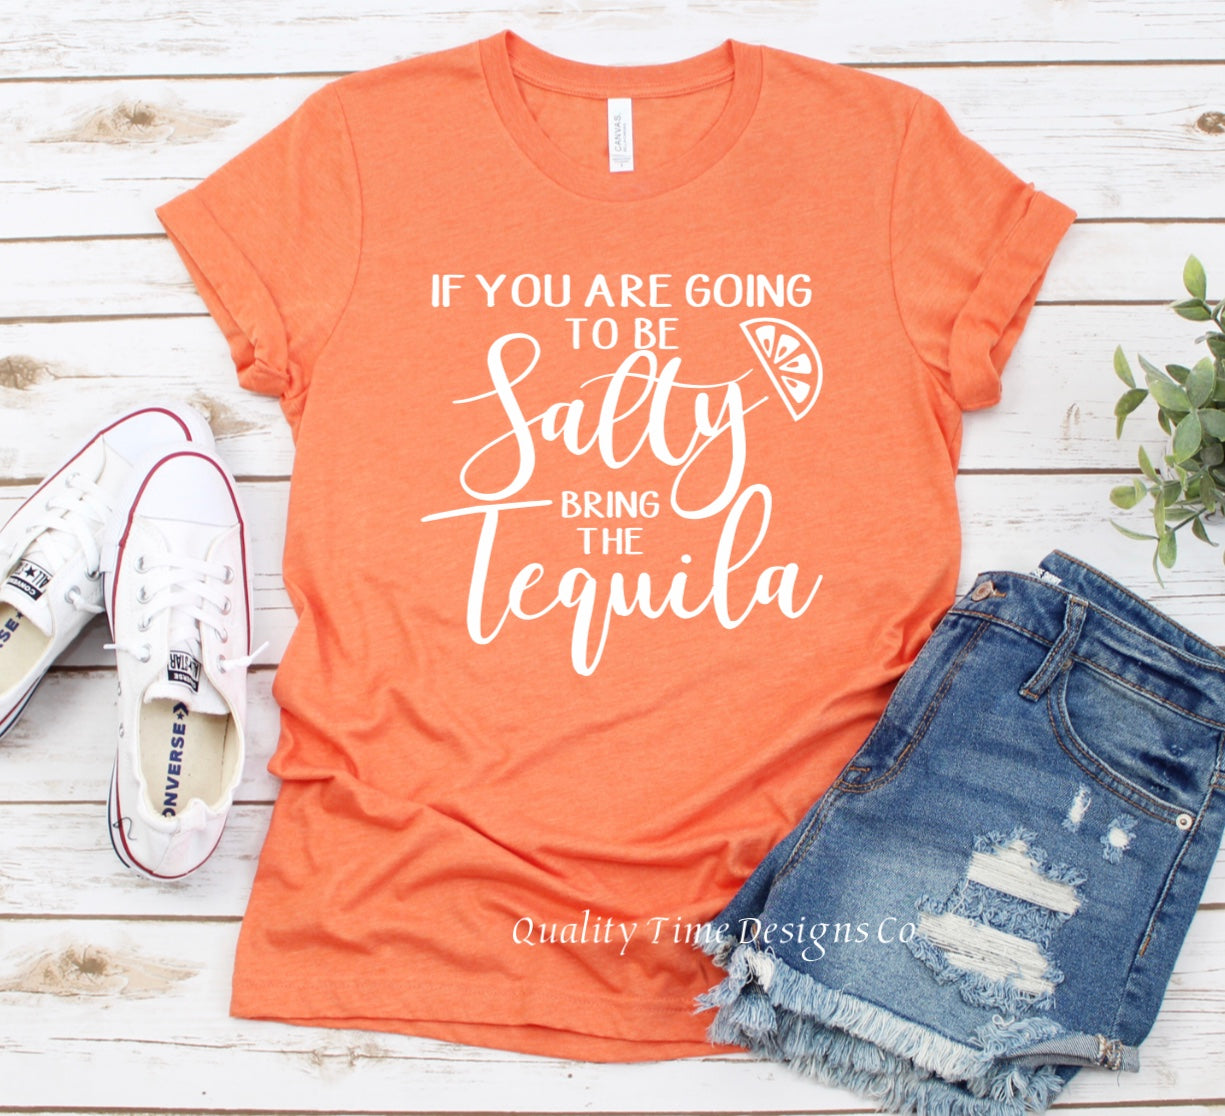 If you are going to be salty bring the tequila t-shirt 